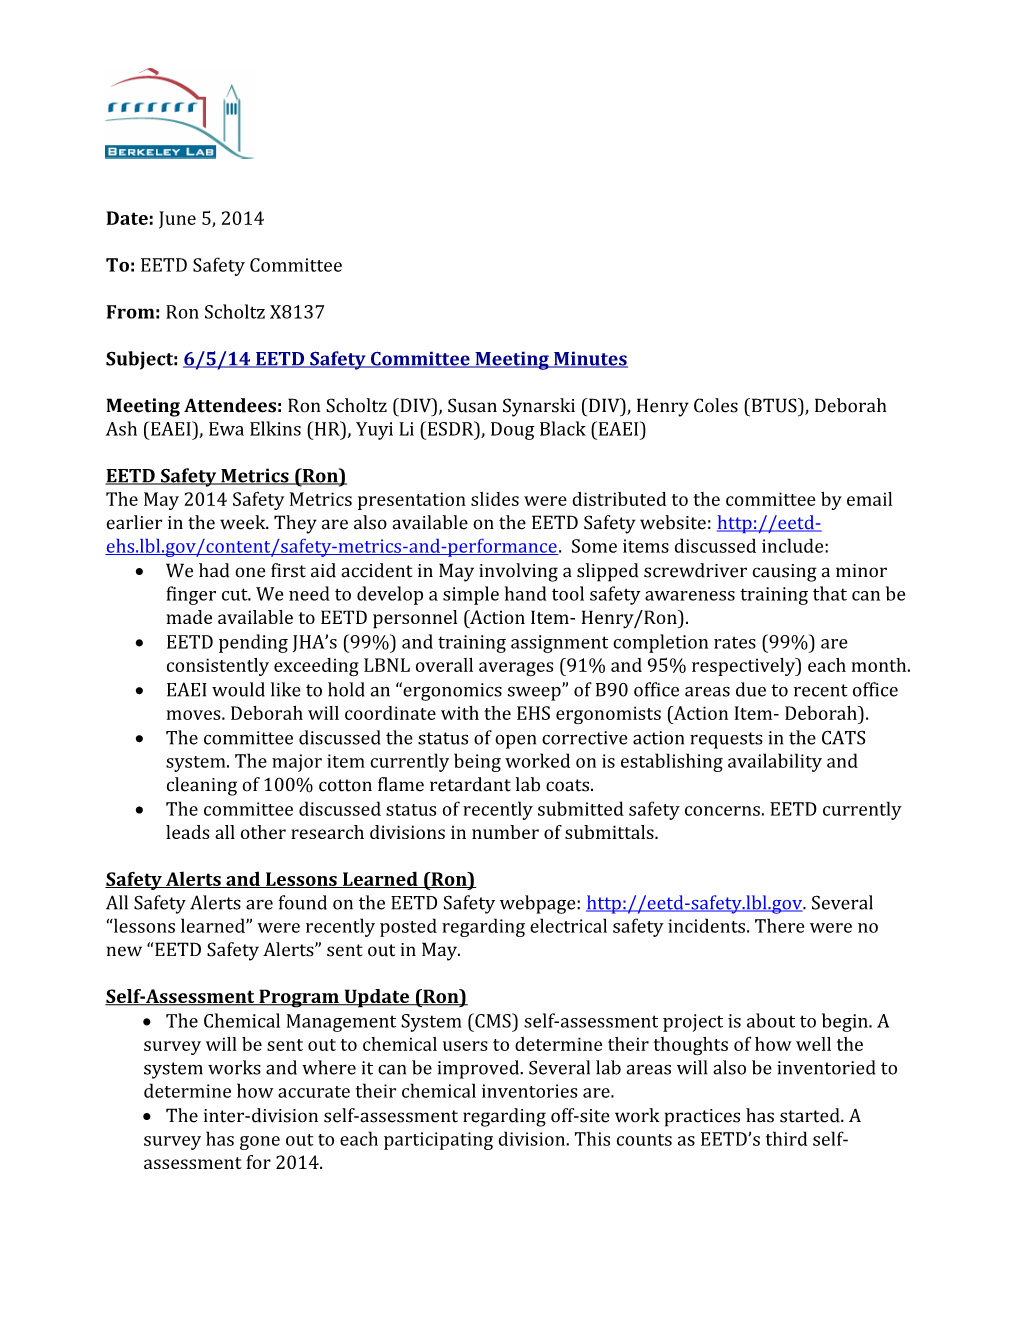 Subject:6/5/14 EETD Safety Committee Meeting Minutes